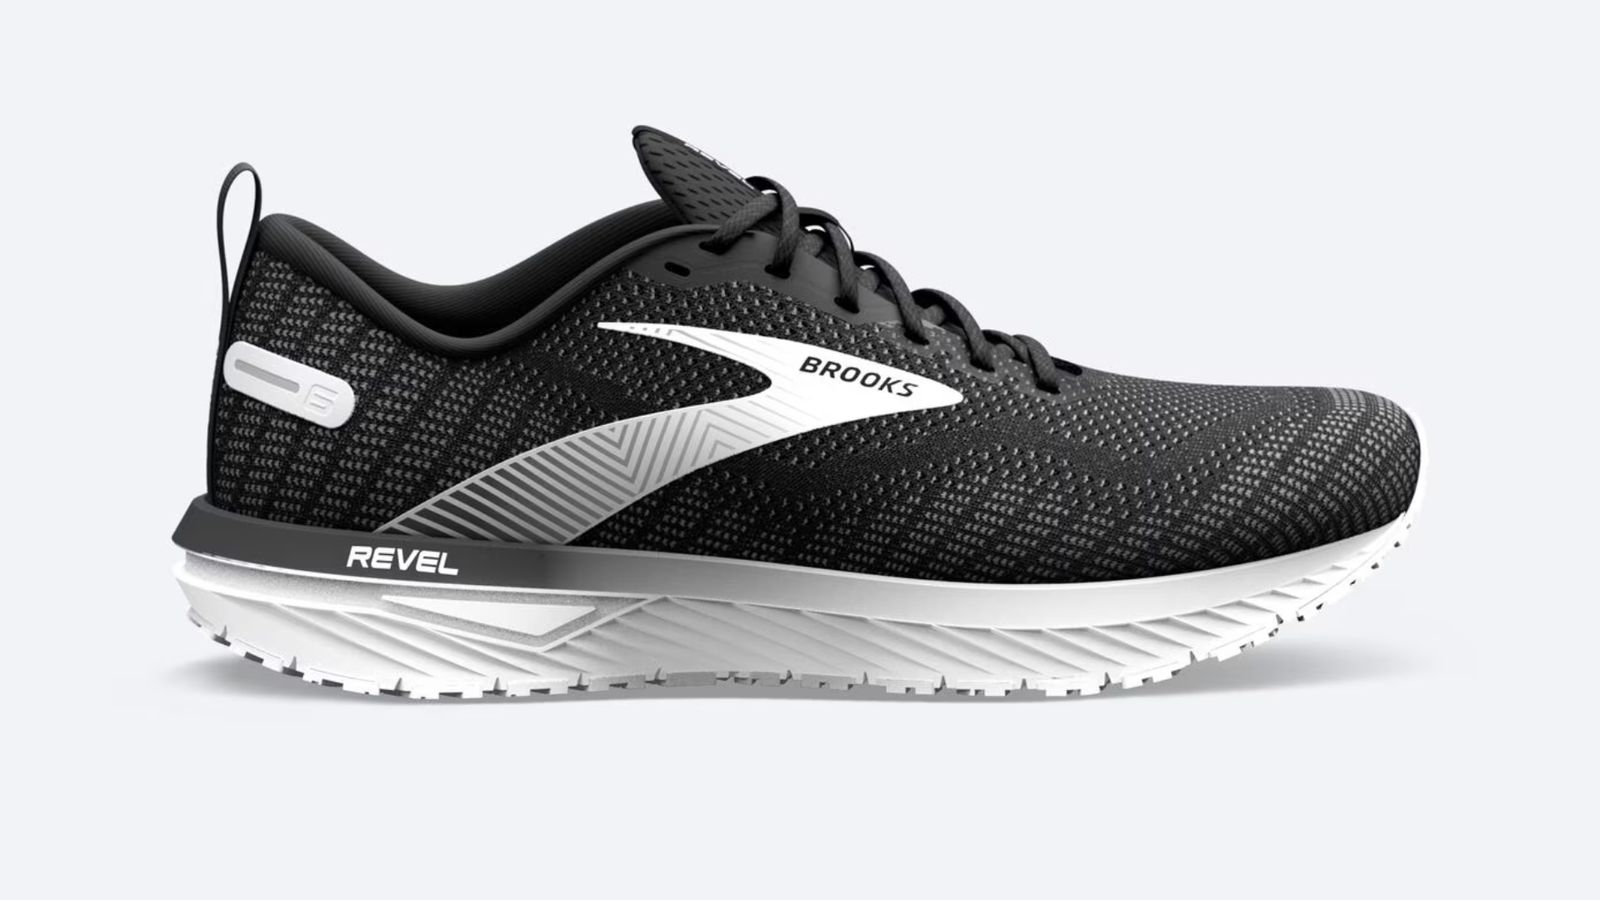 Brooks Revel 6 product image of a black, knitted running shoe with a white sole unit and stripe down the side.